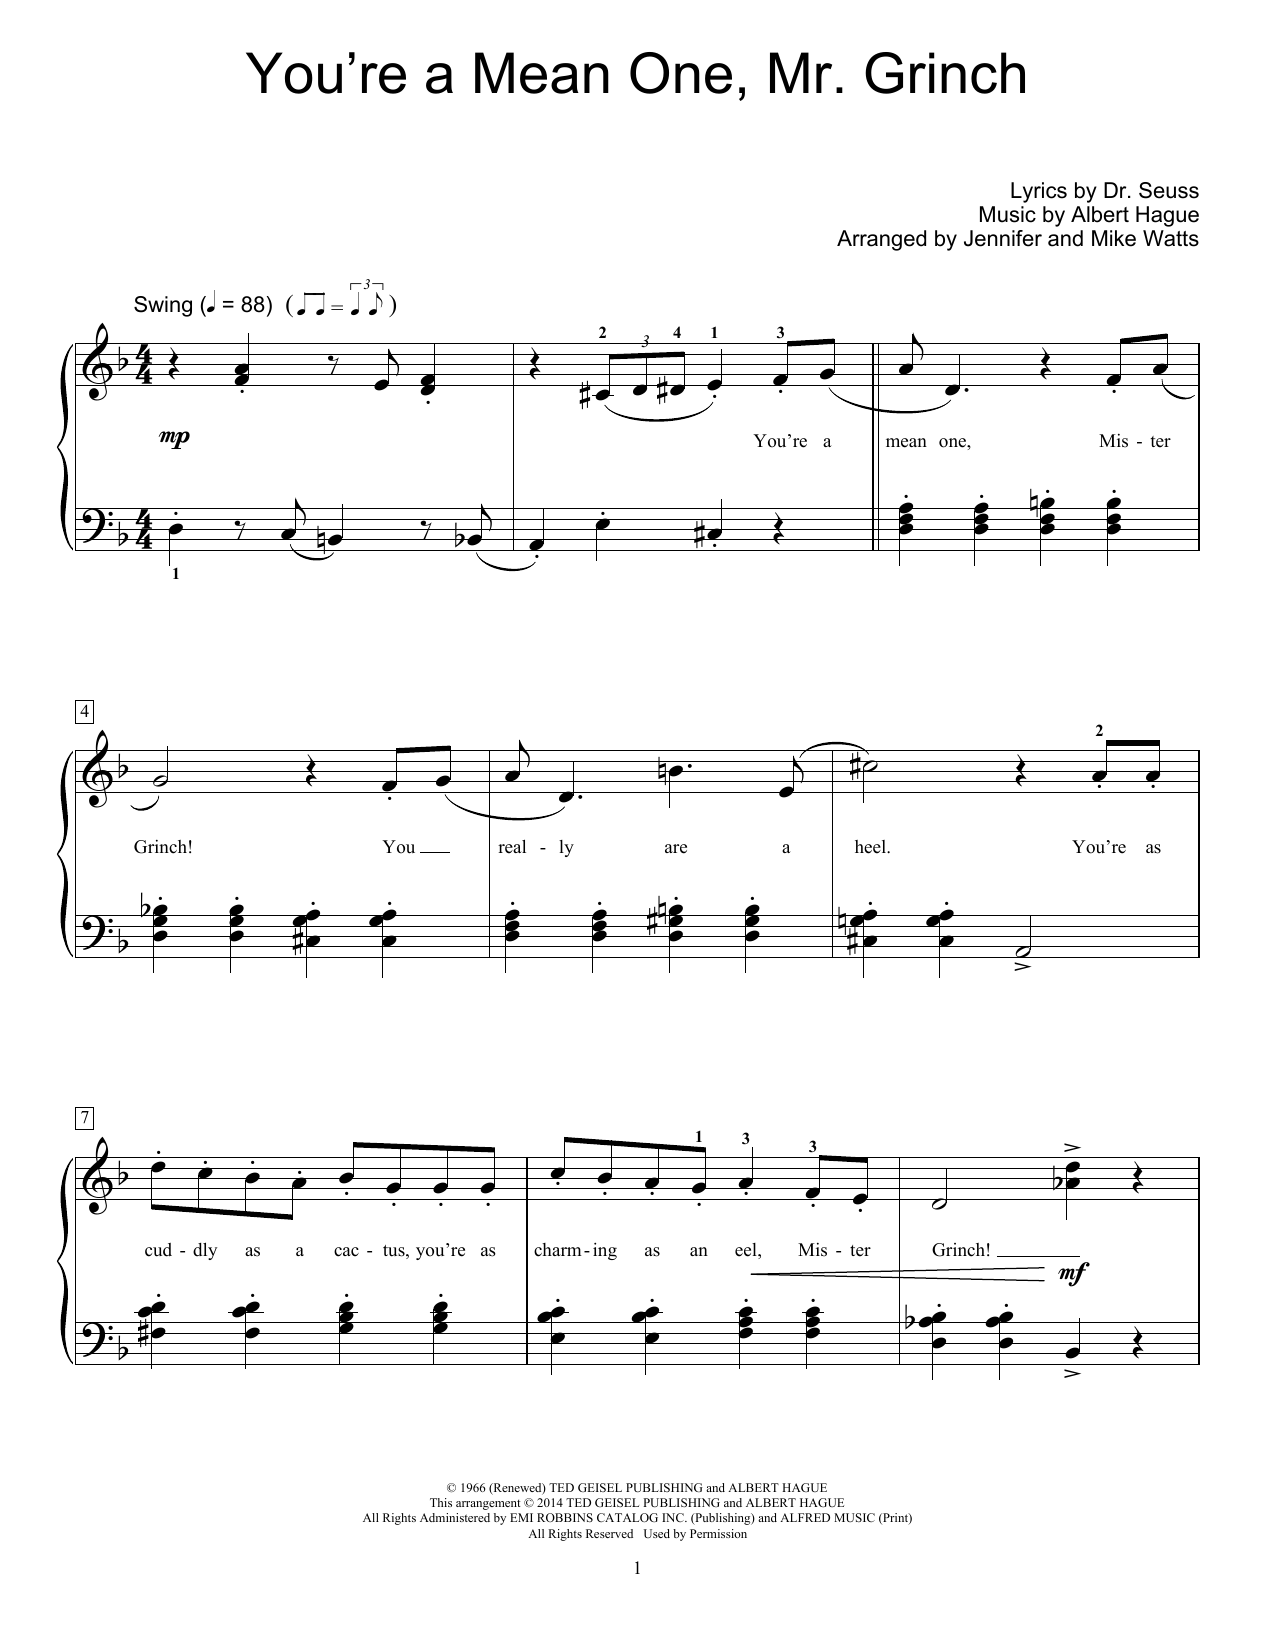 Download Jennifer Watts You're A Mean One, Mr. Grinch Sheet Music